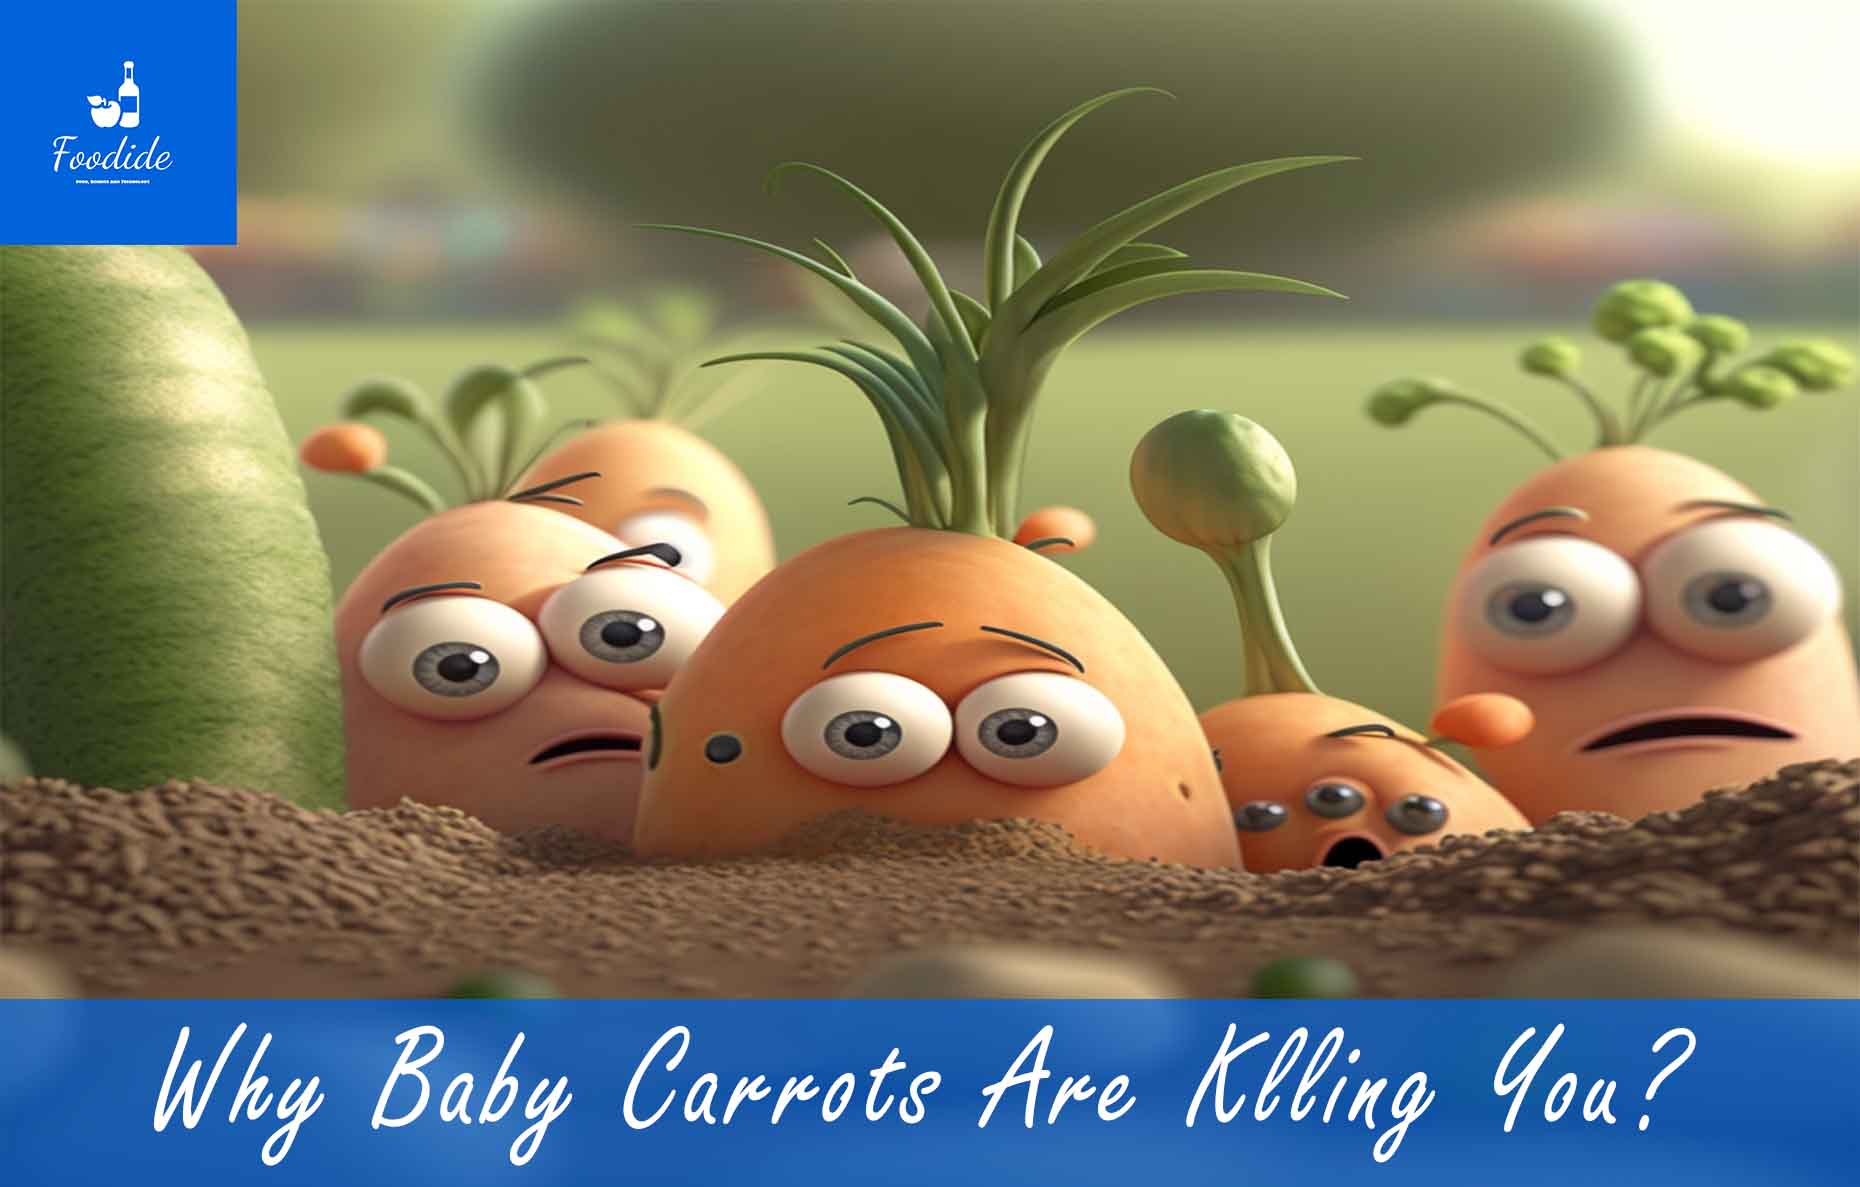 Why baby carrots are killing you [Reveal The Truth] - Foodide